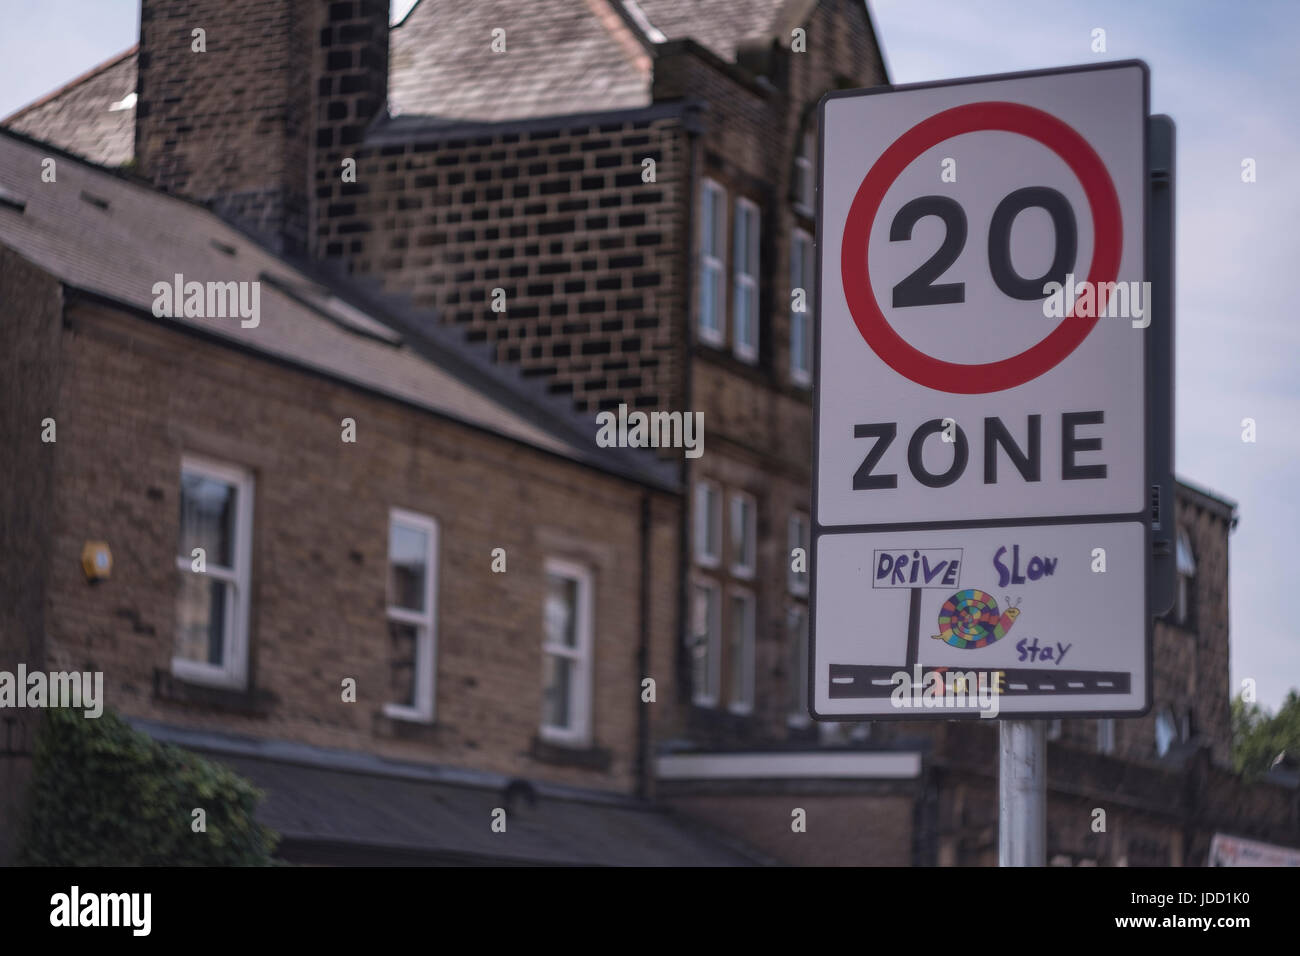 Twenty (20) miles per hour zone speed limit sign in Guiseley near Leeds, West Yorkshire Stock Photo